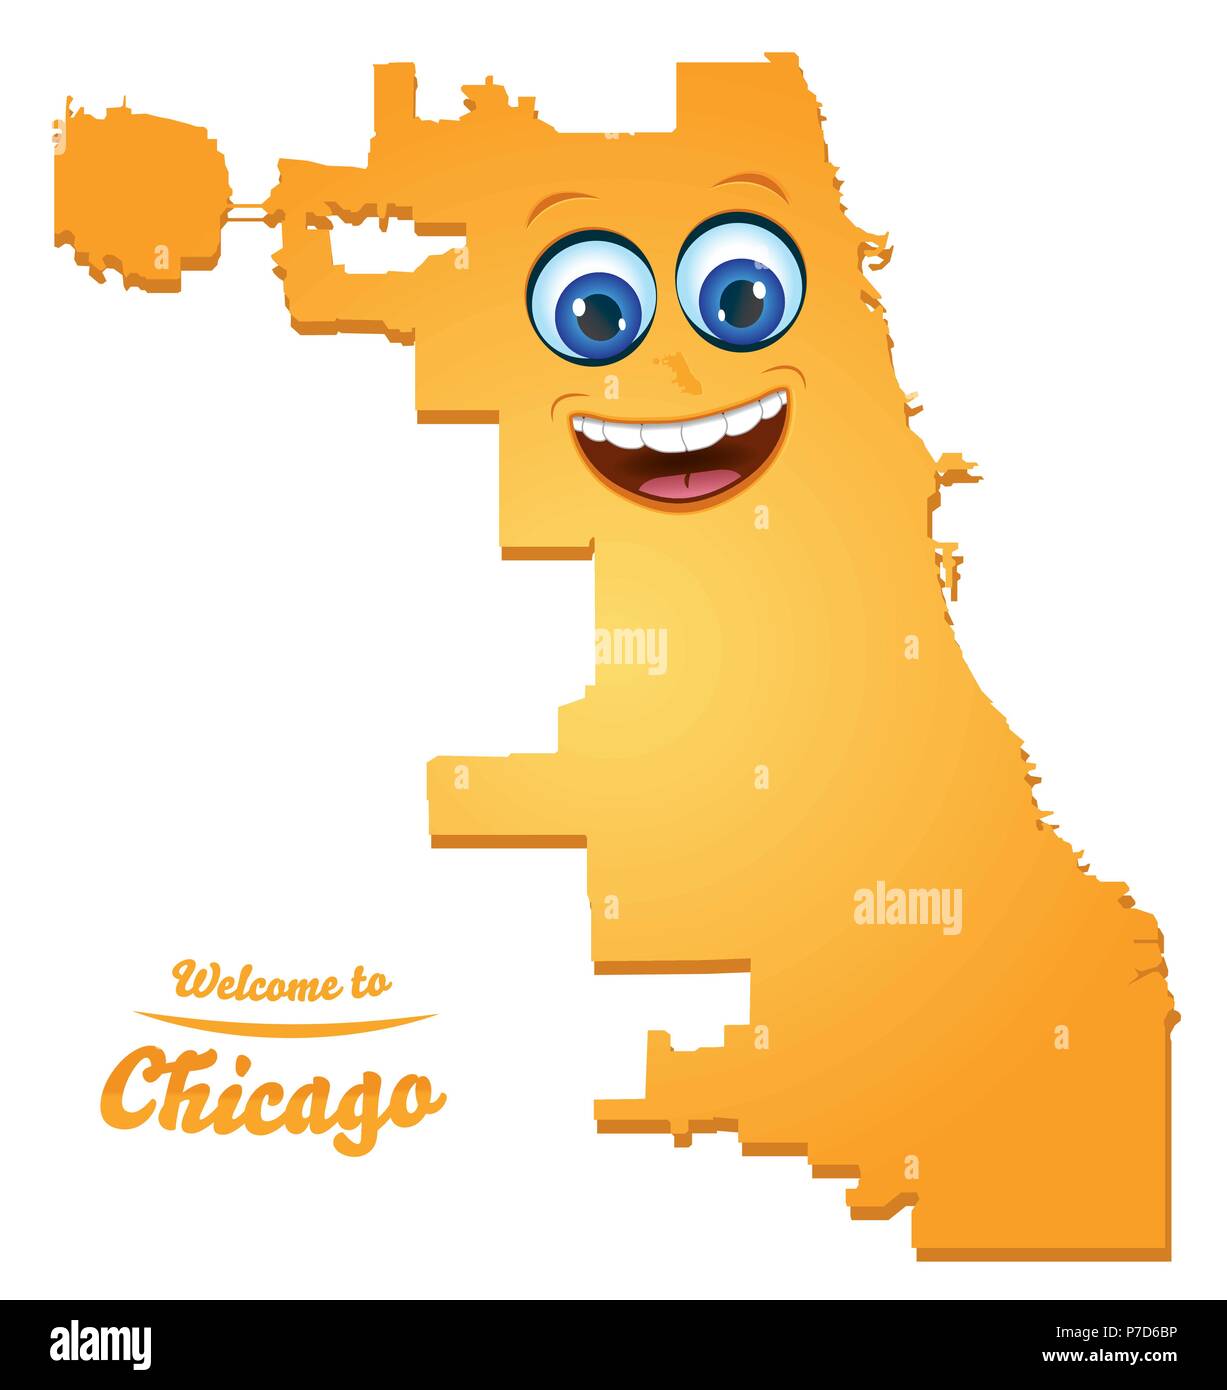 Chicago Illinois city map with smiling face illustration Stock Vector